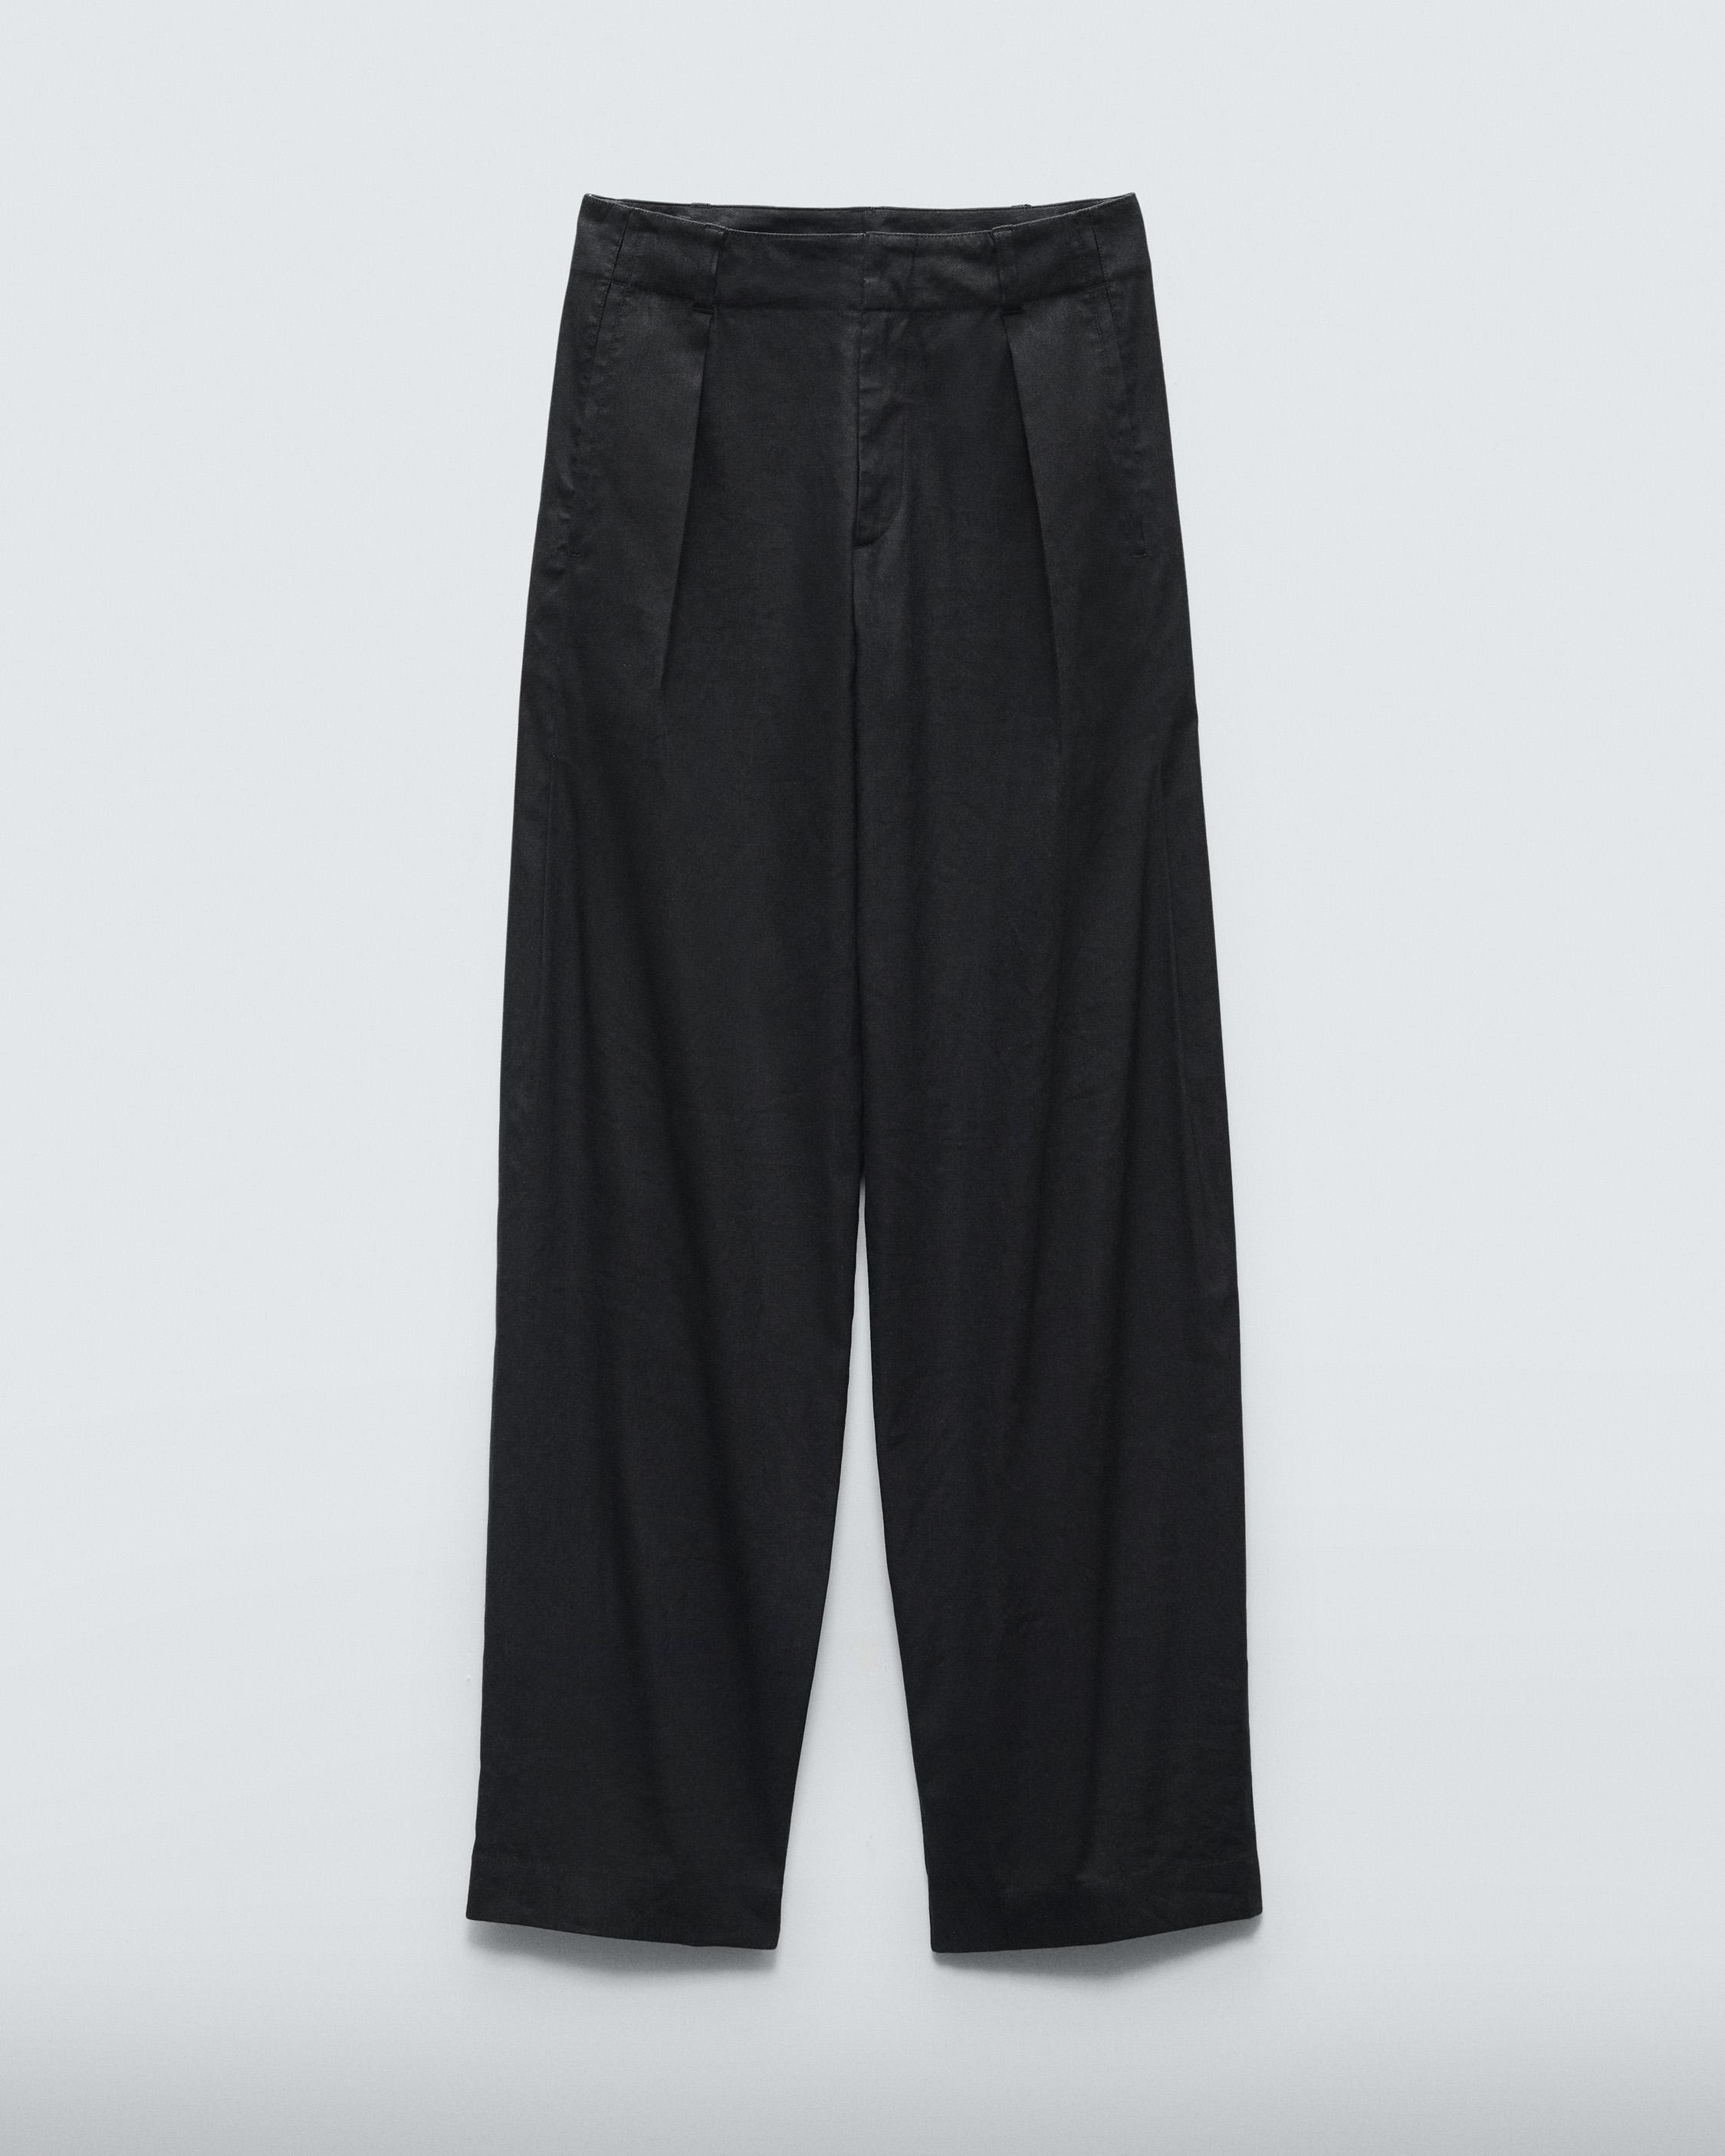 Donovan Linen Pant
Relaxed Fit - 1